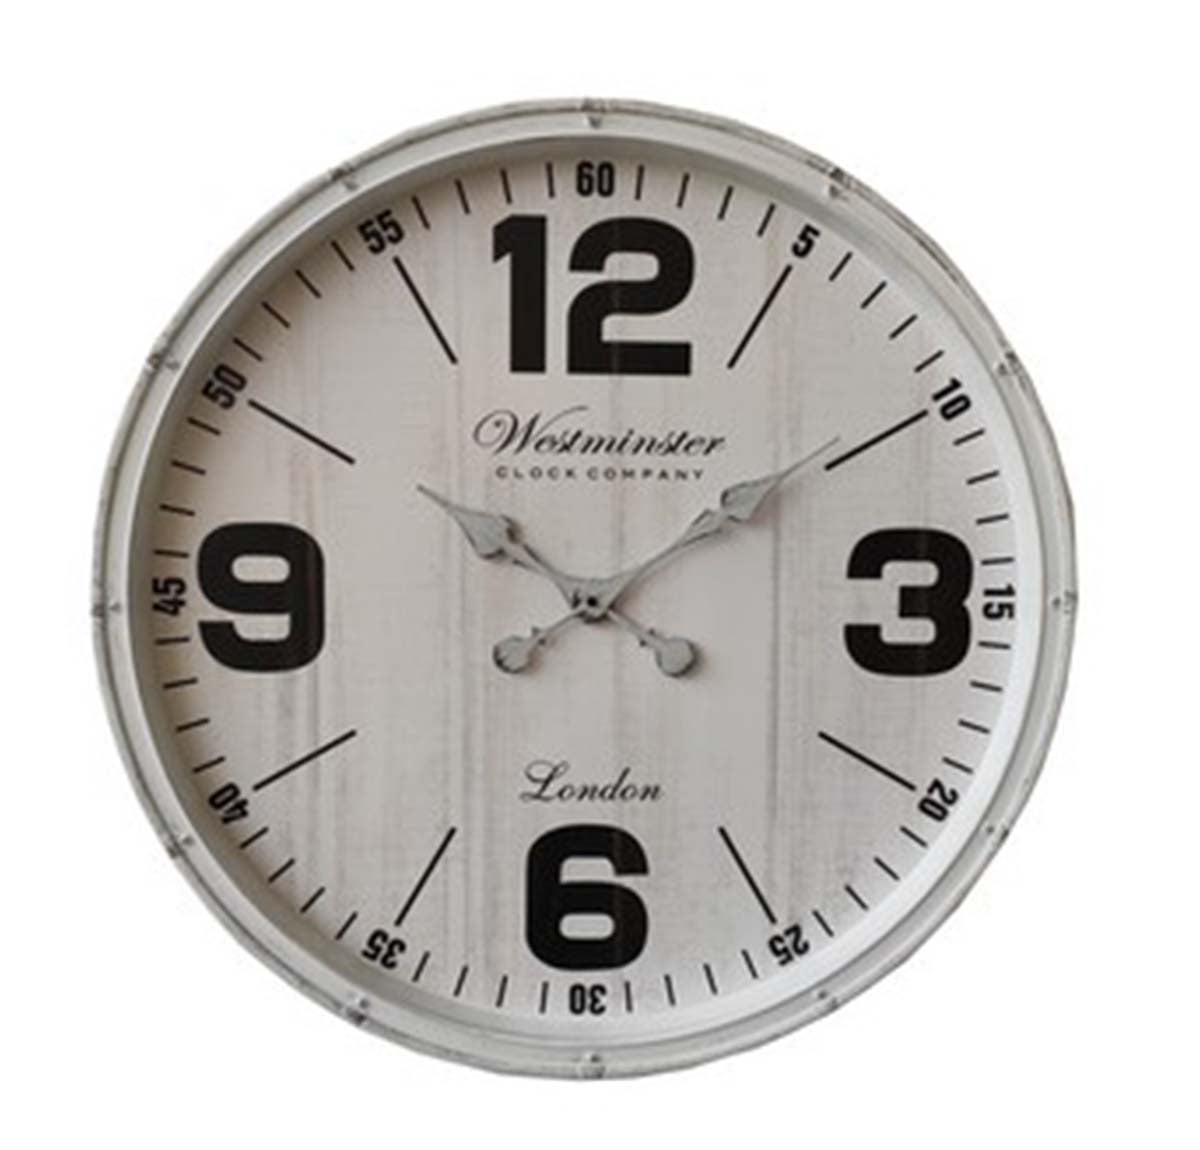 The Westminster Numeral Round Wall Clock - White | Home Decor